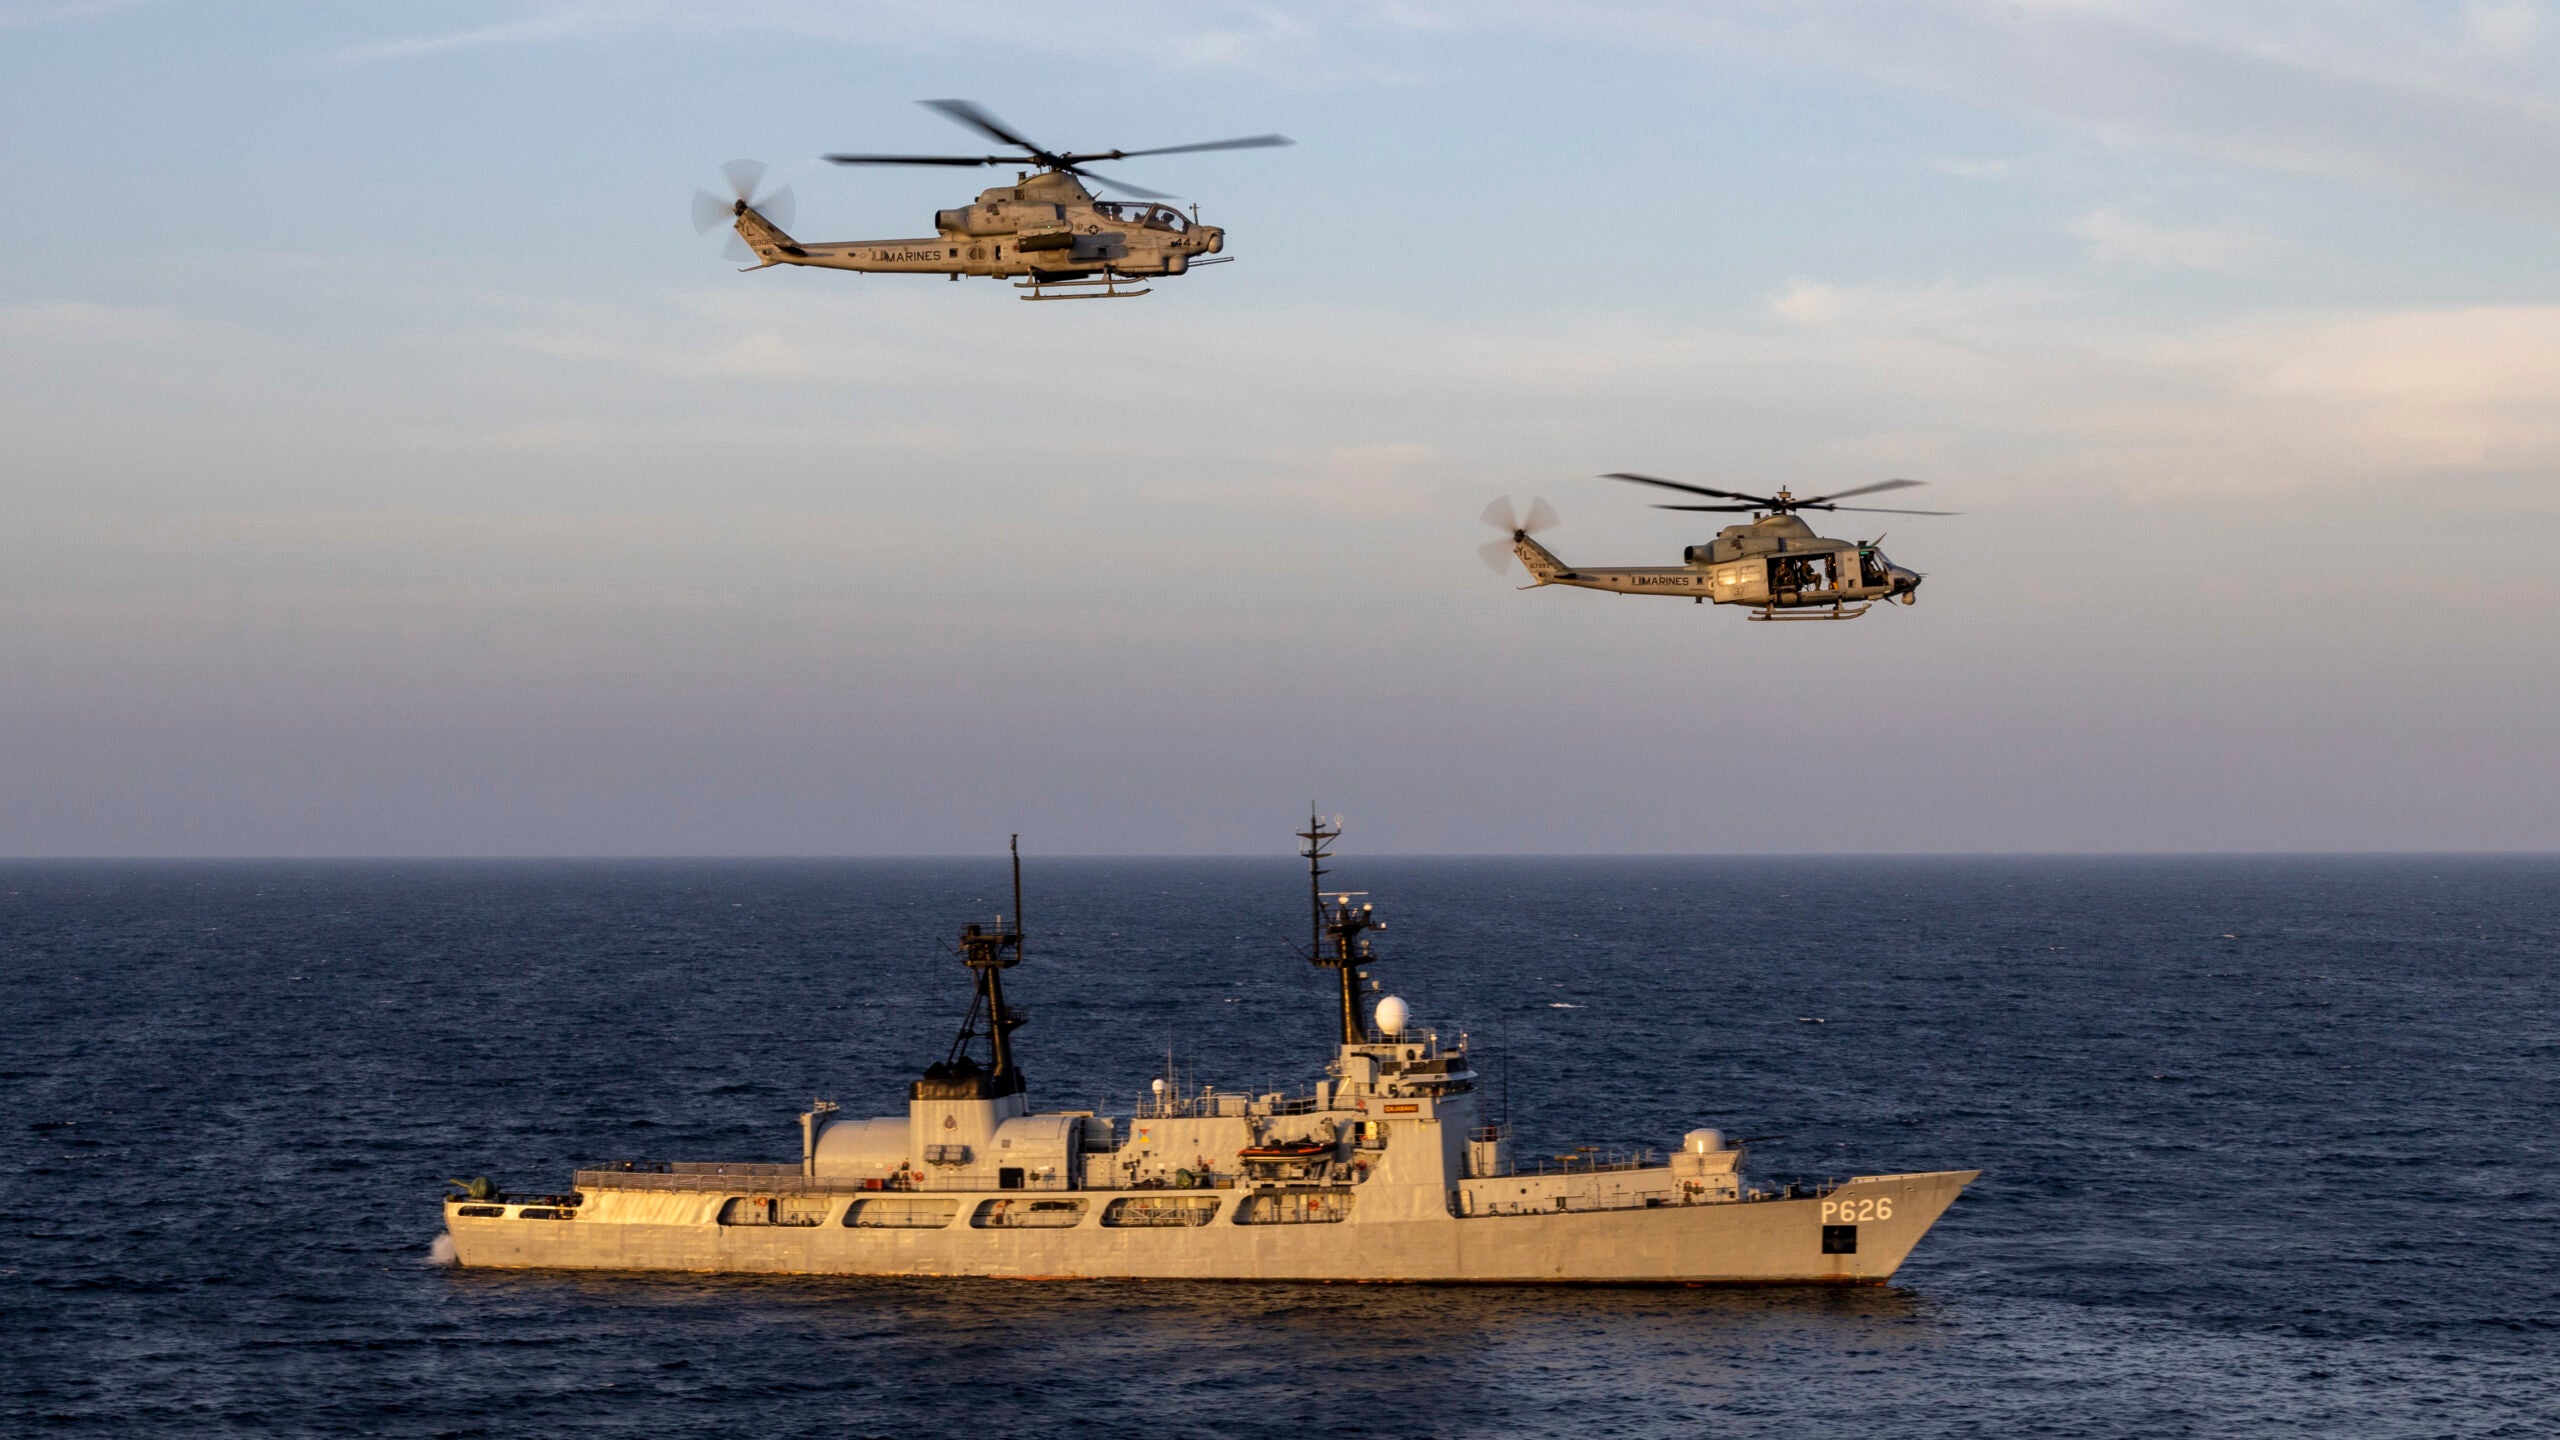 GULF OF MANNAR (Jan. 24, 2023) – U.S. Marine Corps UH-1Y Venom and AH-1Z Viper pilots with Marine Medium Tiltrotor Squadron (VMM) 362 (Rein.), 13th Marine Expeditionary Unit, fly next to Sri Lankan Naval Ship Gajabahu (P626), Jan. 24. The 13th MEU is embarked on the Makin Island Amphibious Ready Group, comprised of amphibious assault ship USS Makin Island (LHD 8) and amphibious transport dock ships USS John P. Murtha (LPD 26) and the Anchorage, and operating in the U.S. 7th Fleet area of operations to enhance interoperability with Allies and partners and serve as a ready-response force to defend peace and maintain stability in the Indo-Pacific region. (U.S. Marine Corps photo by Sgt. Kevin G. Rivas)